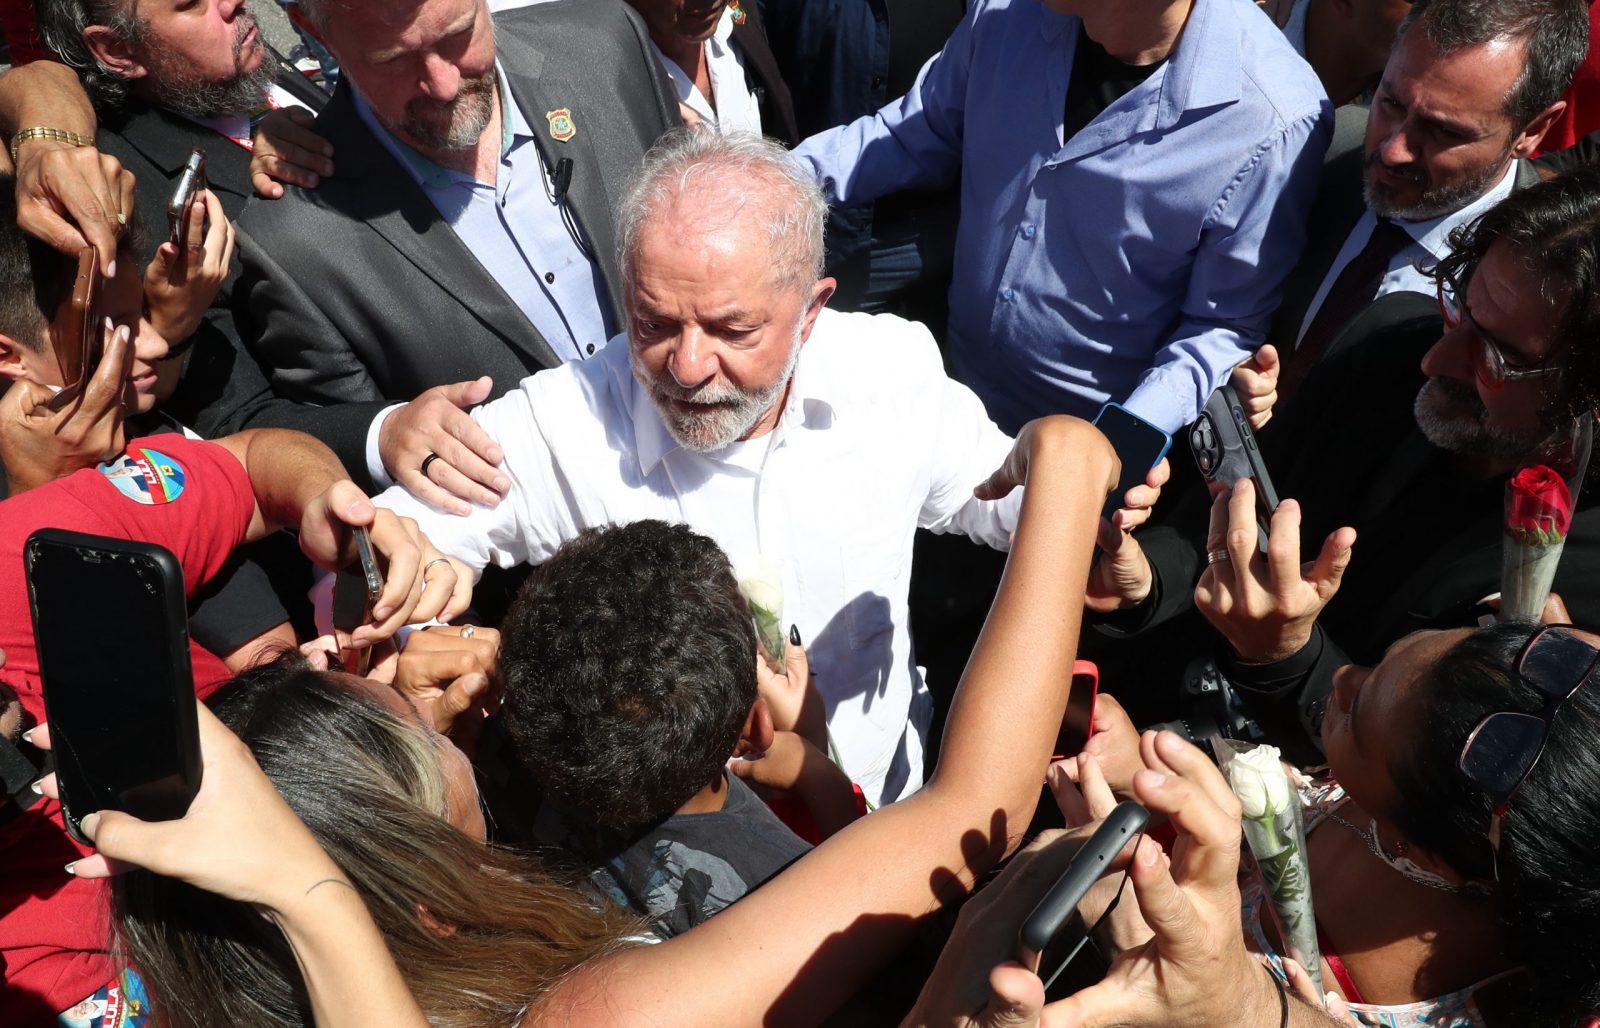 epa10275100 Former Brazilian president and presidential candidate Luiz Inacio Lula da Silva greets supporters during his departure after voting in the second round of the presidential elections in Sao Bernardo do Campo, Sao Paulo, Brazil, 30 October 2022. Brazilians headed to polling stations on 30 October to decide between former President Luiz Inacio Lula da Silva or his rival, current President Jair Bolsonaro, as head of State for the 2022-2026 period.  EPA/Antonio Lacerda